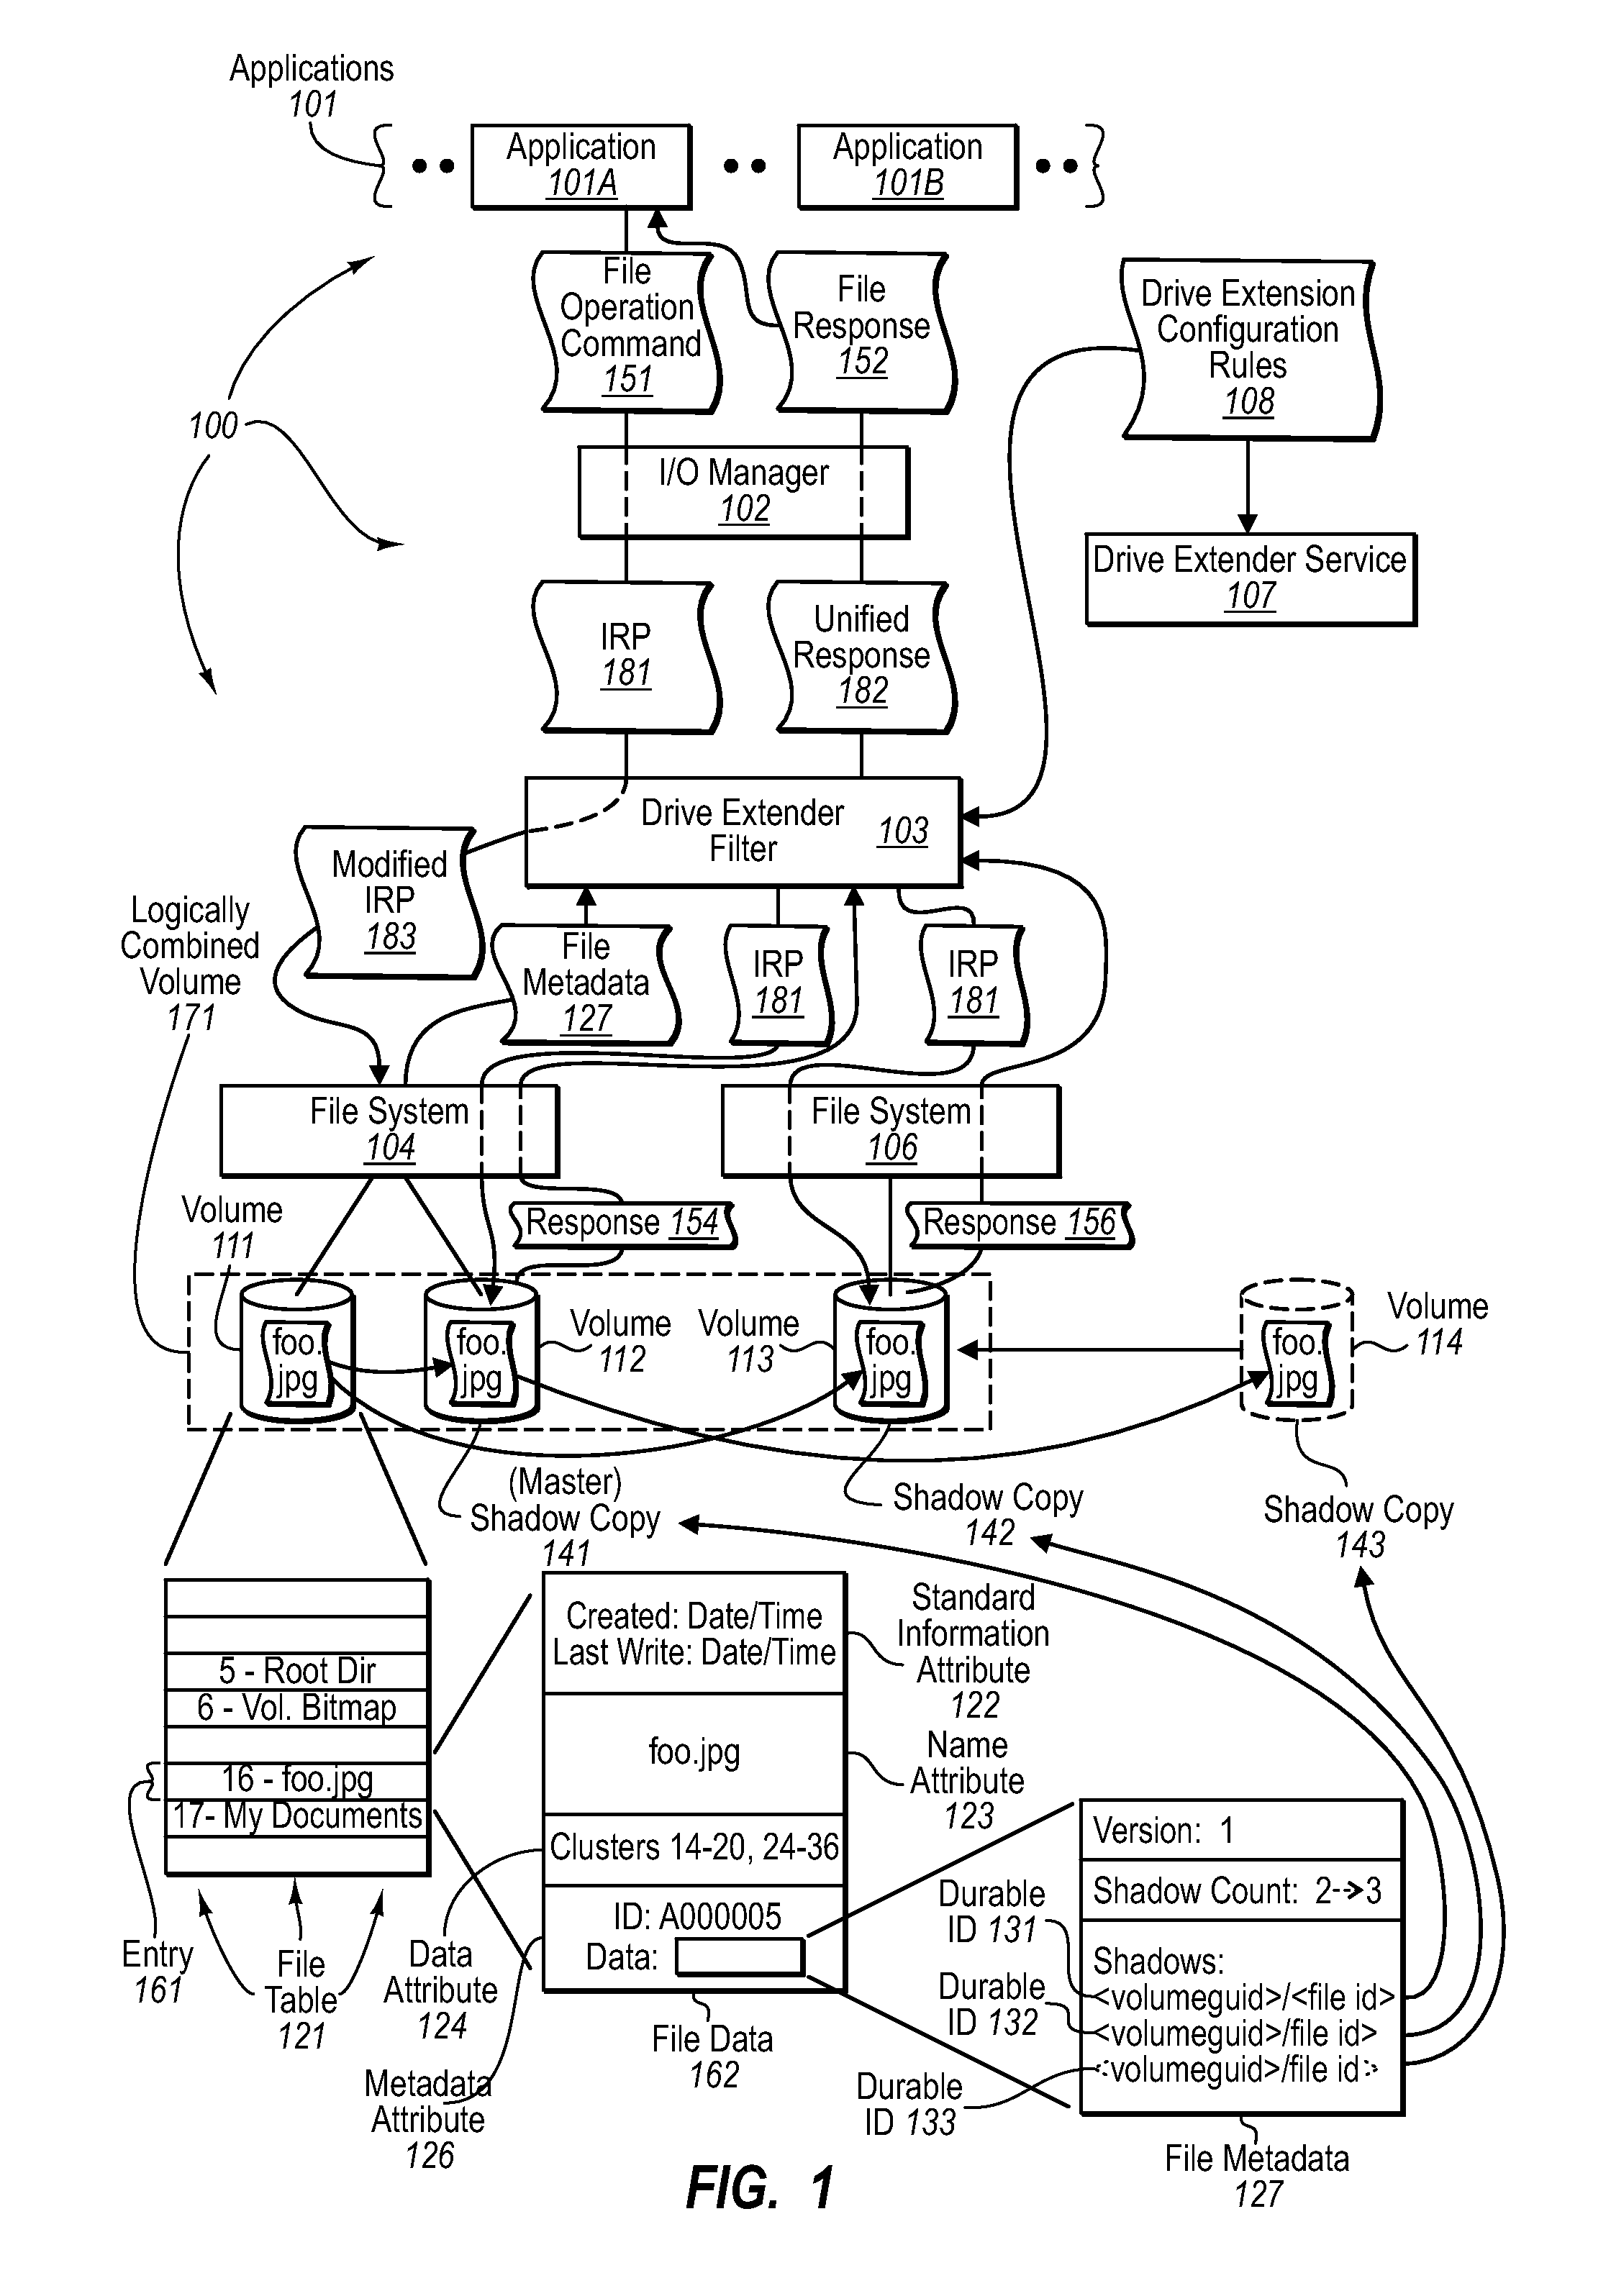 Extending non-volatile storage at a computer system